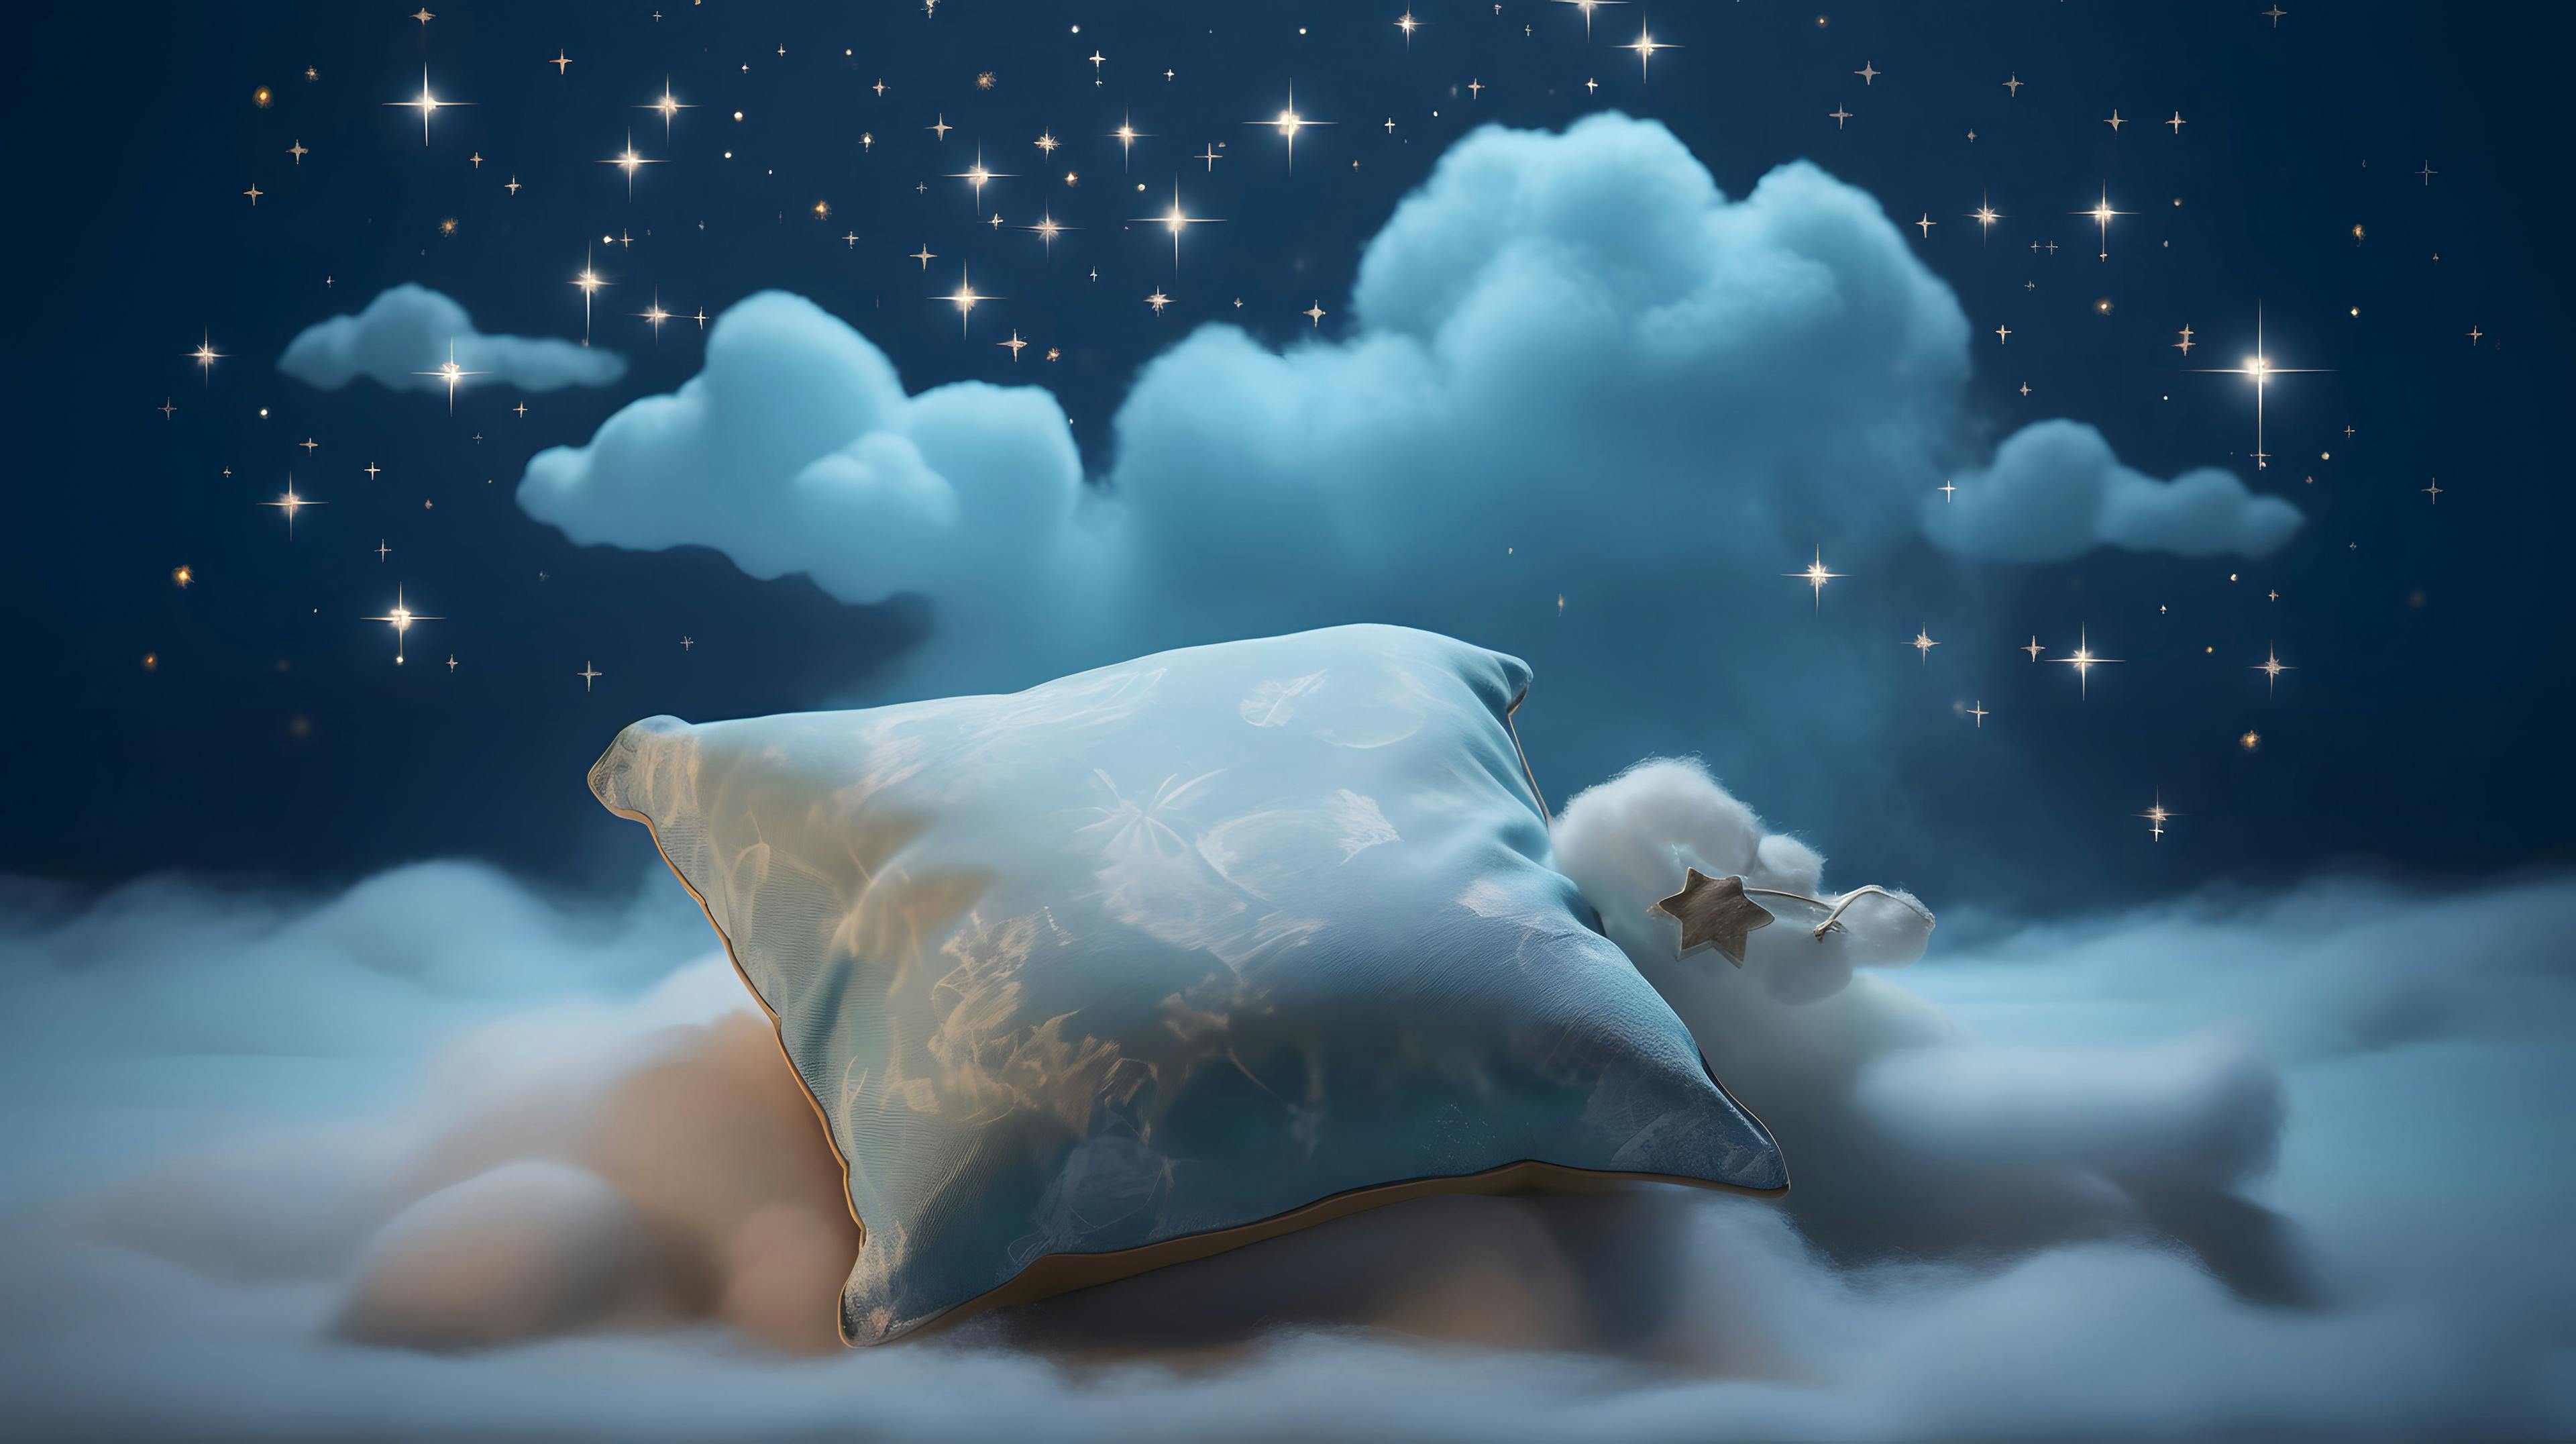 Pillow in the Clouds for Sweet Dreams | image credit: Ziyan Yang - stock.adobe.com